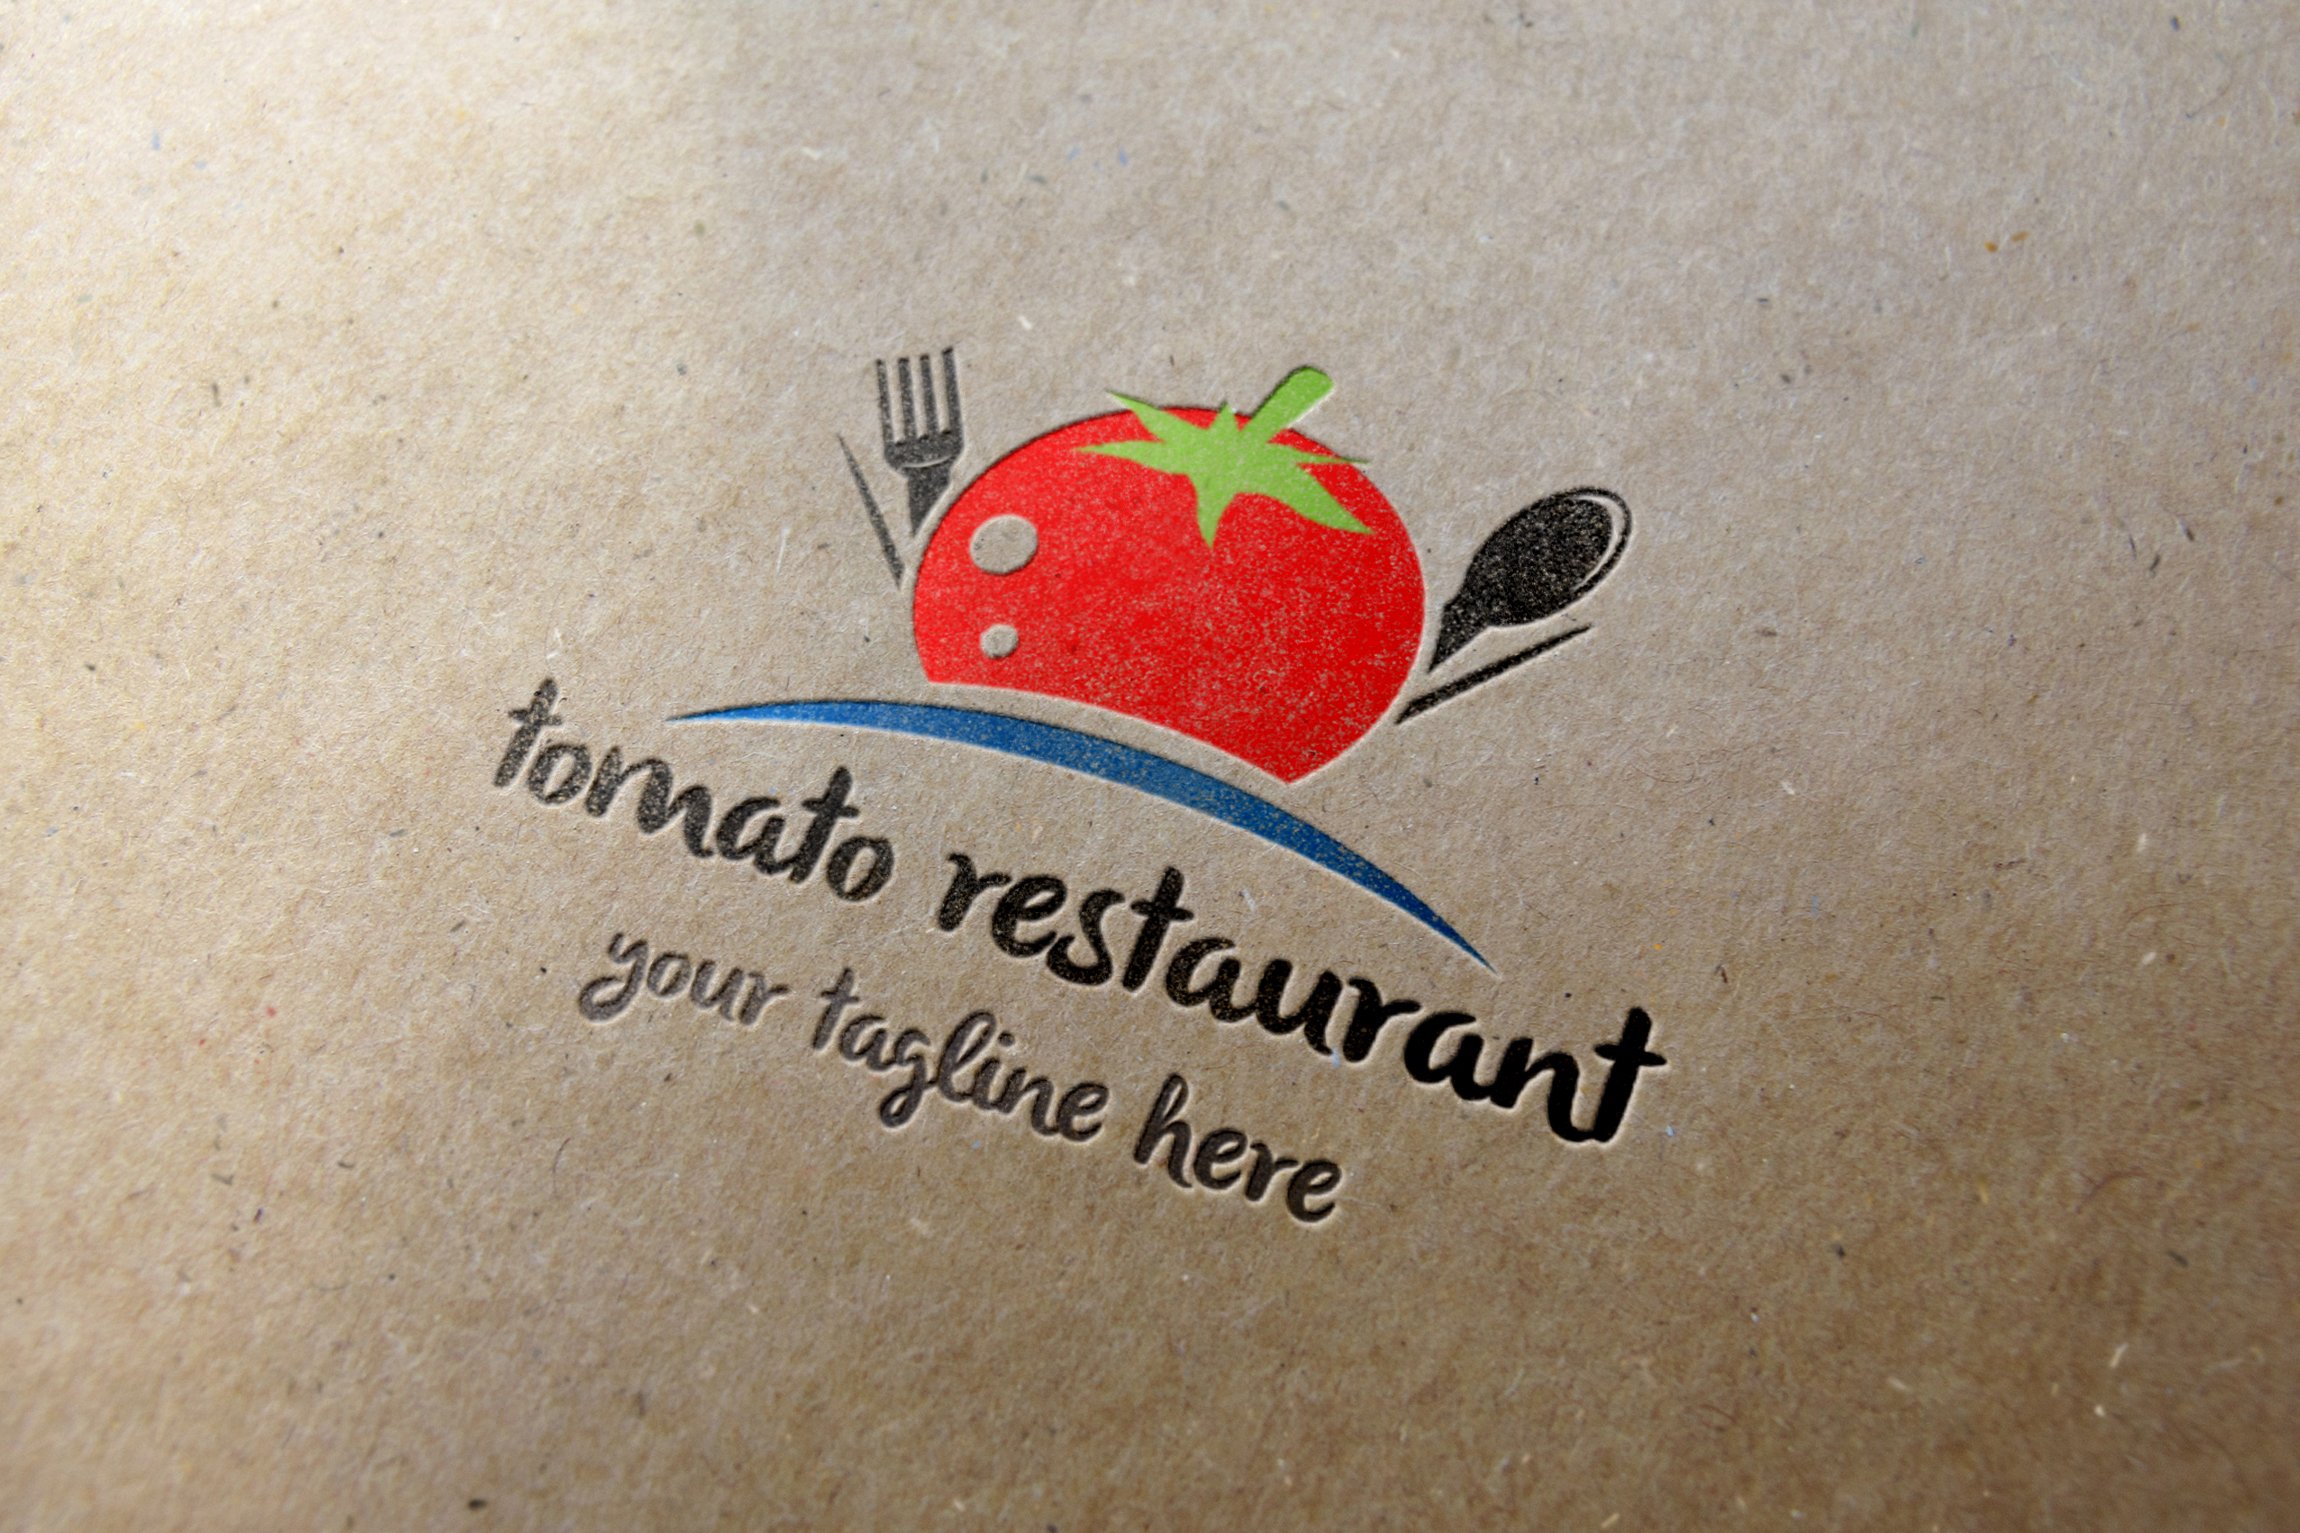 Old beige paper with the tomato logo.